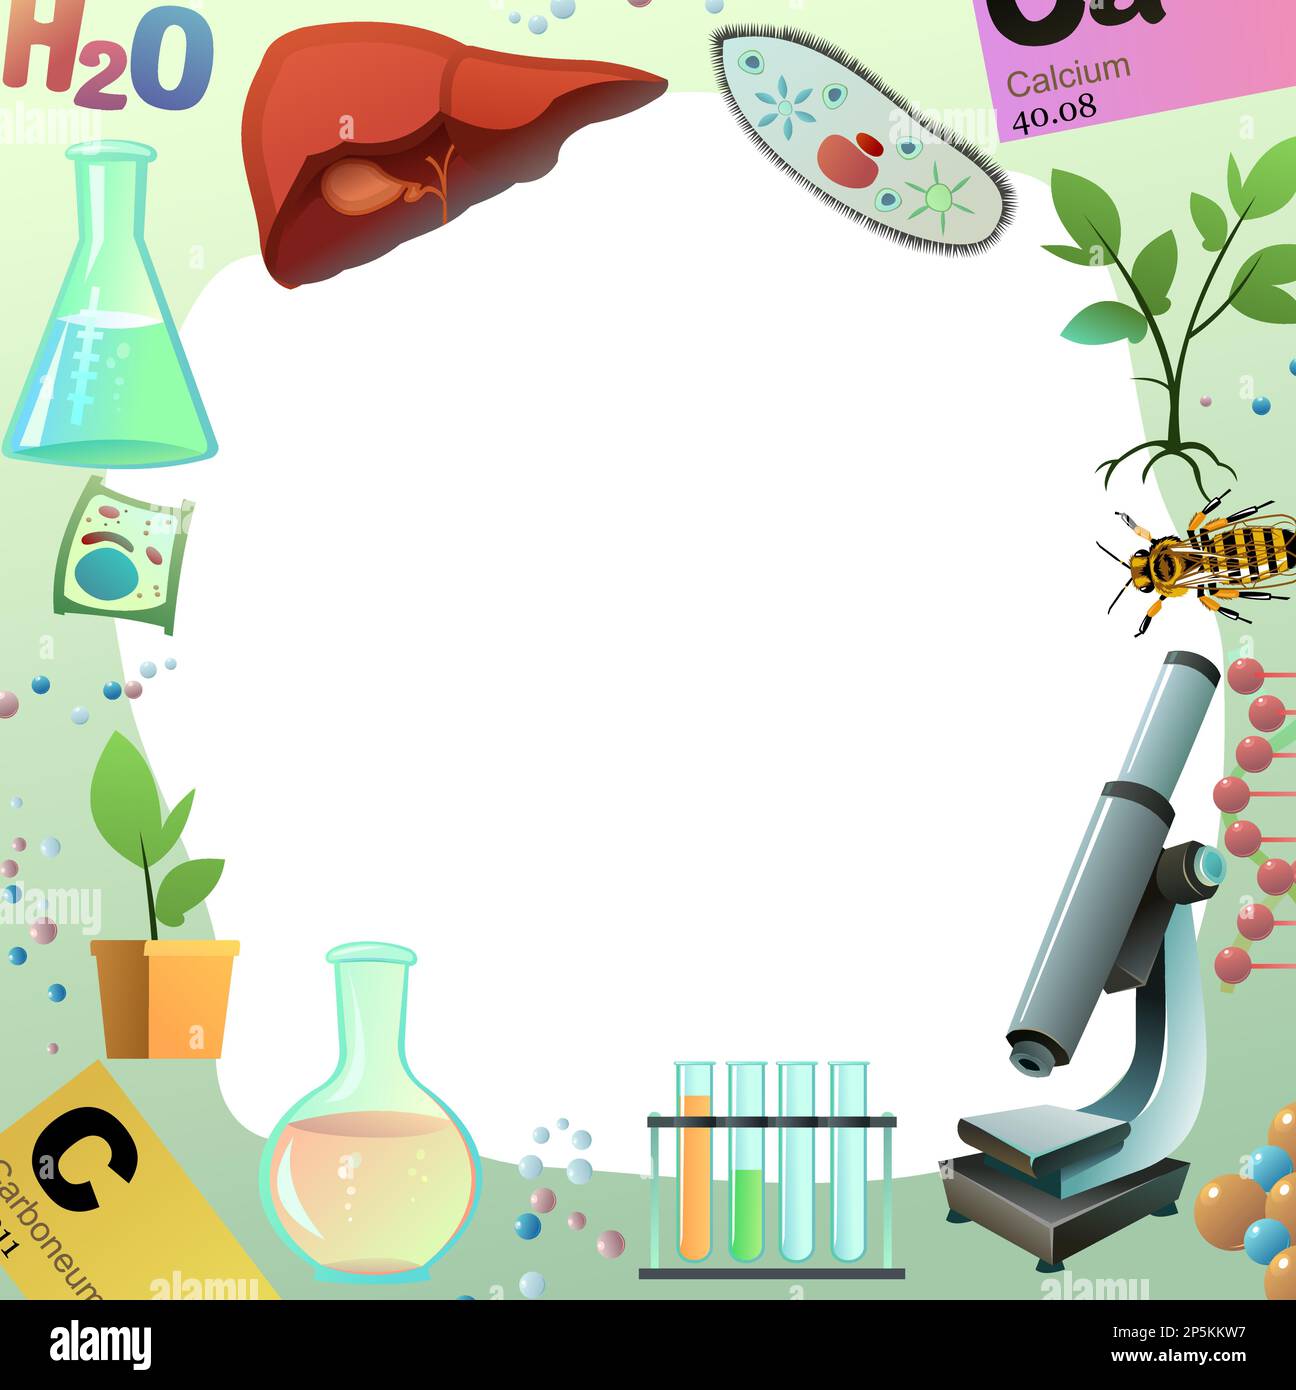 Chemistry picture frame around edge of picture. Round proportion. Science items picture. Study of living cells of plants, animals and humans. Isolated Stock Vector